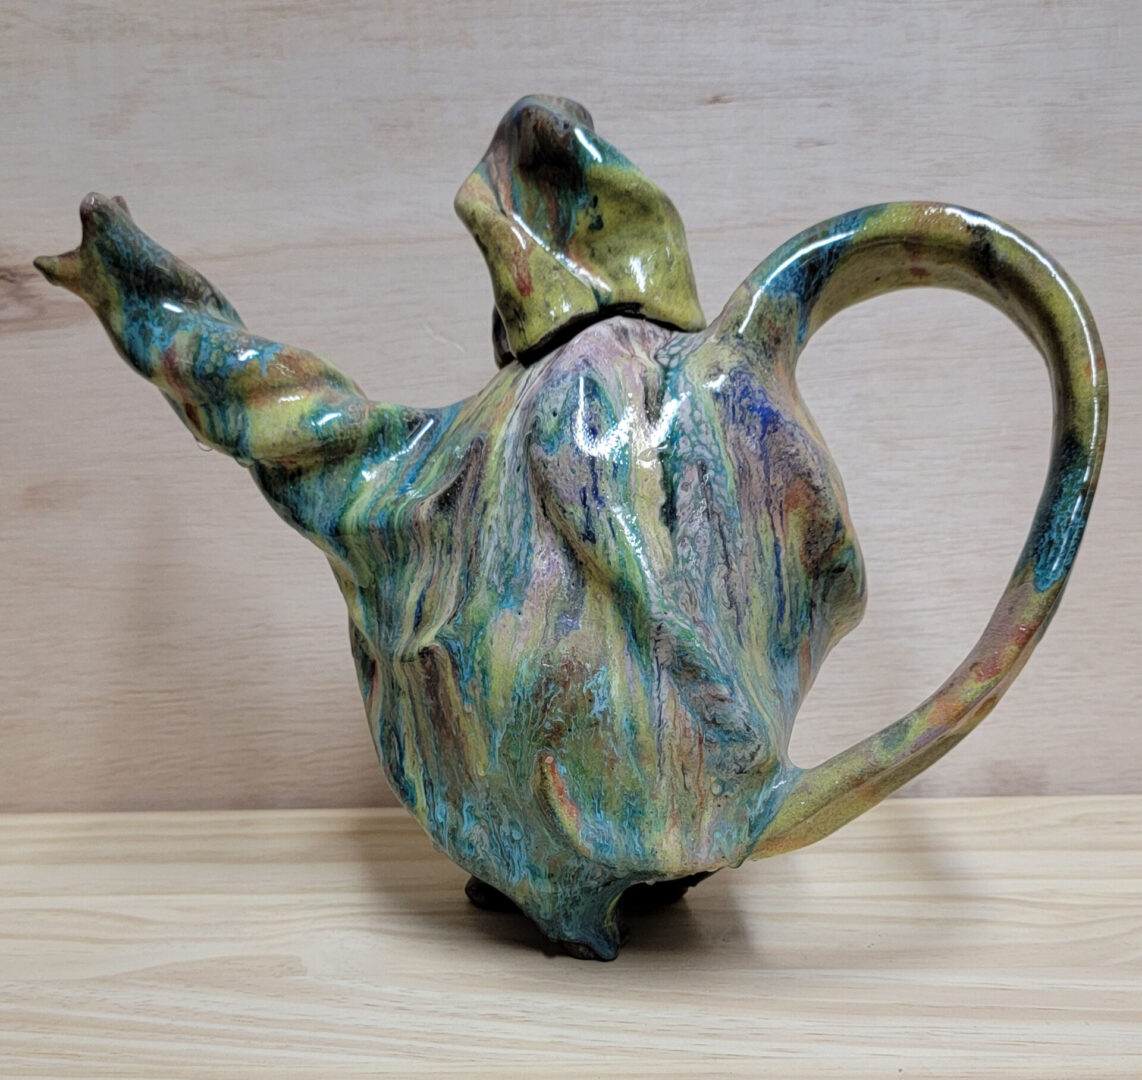 A ceramic teapot with a twisted handle and a lid.